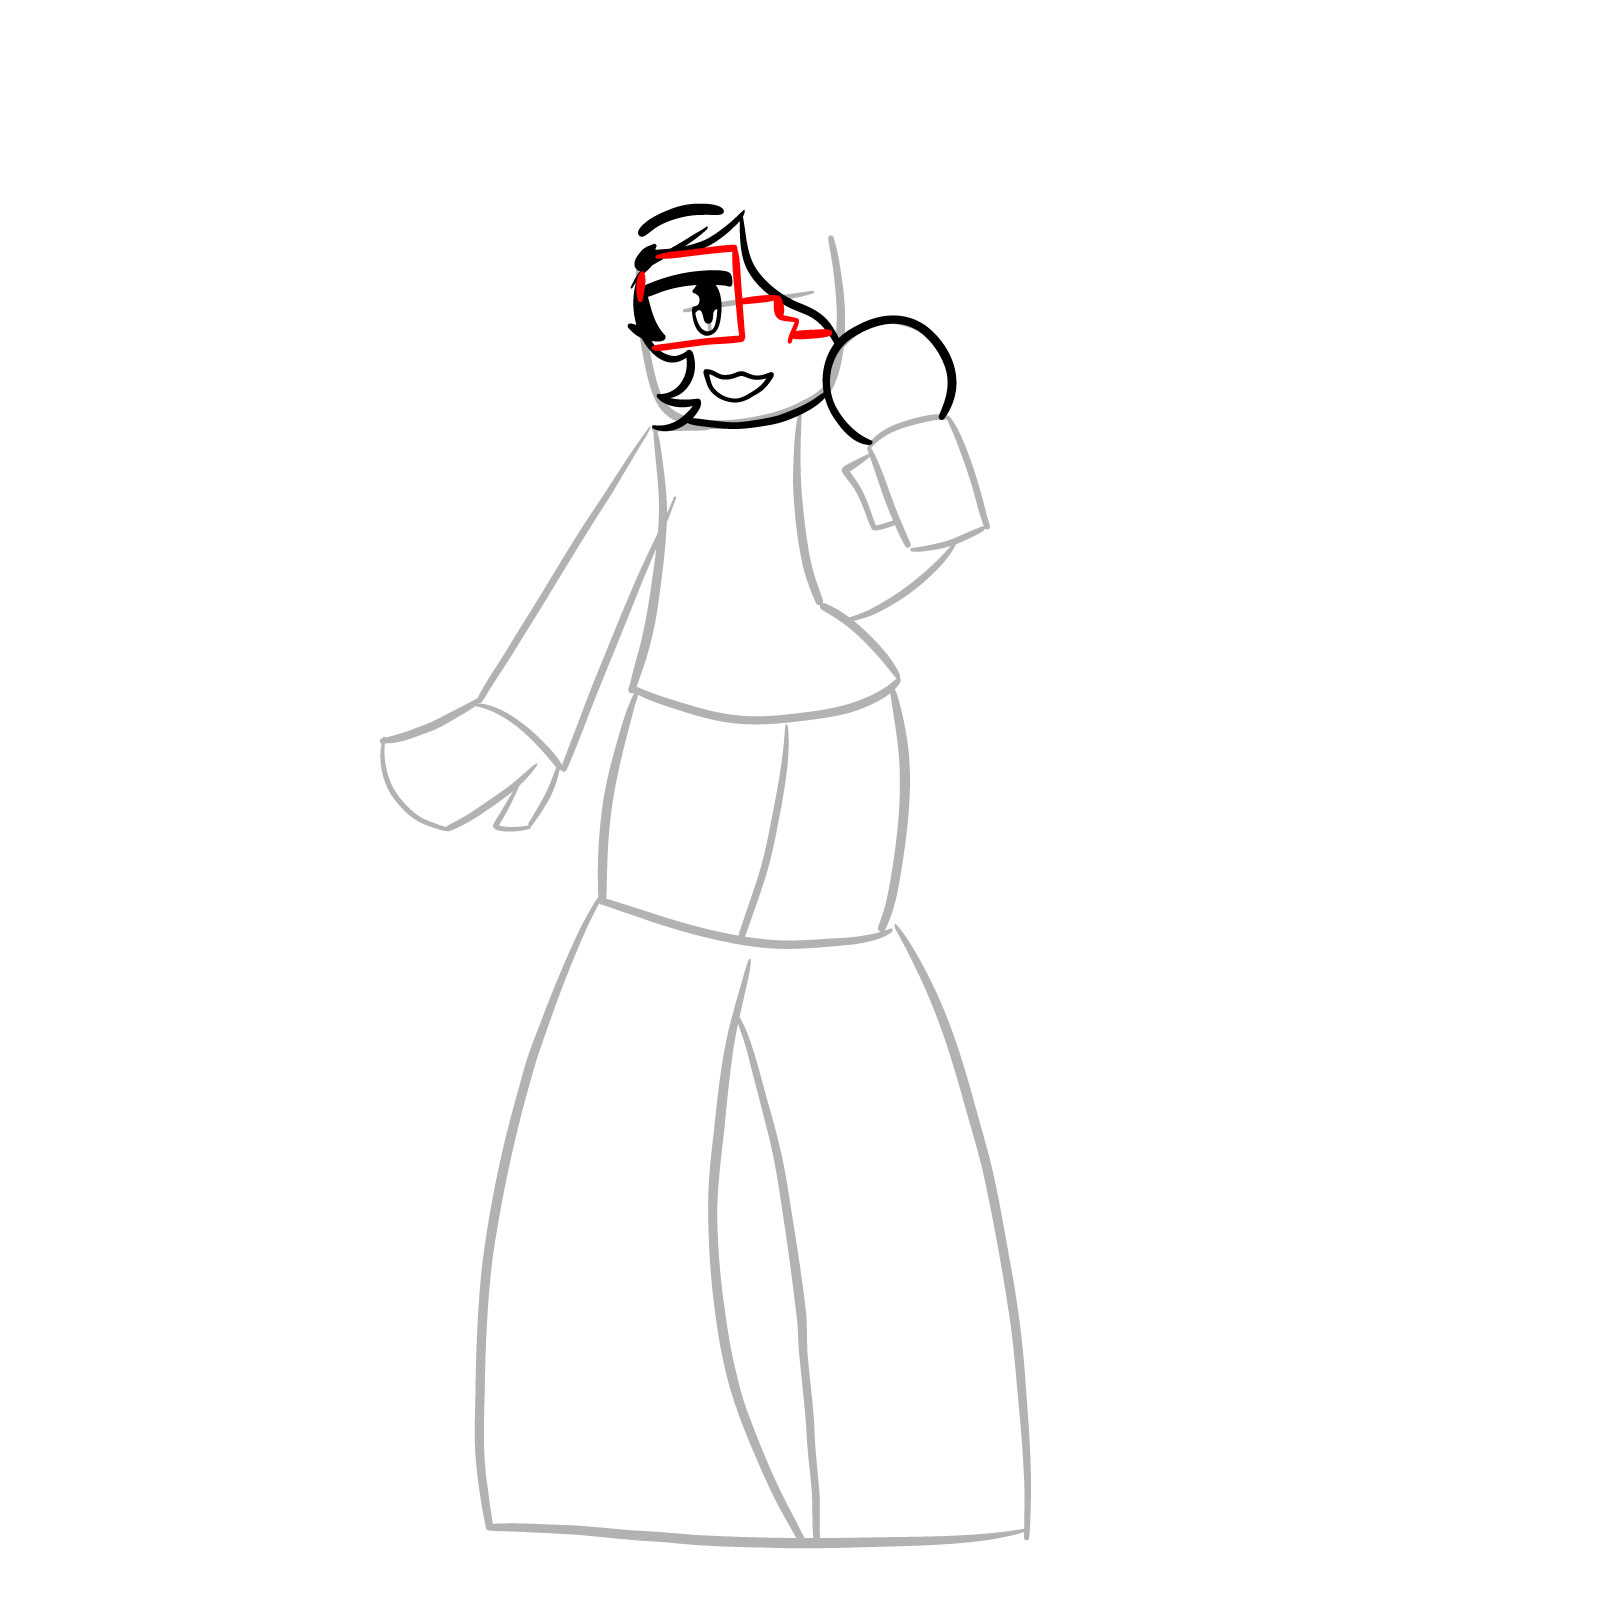 How to draw Vade from FNF - step 10